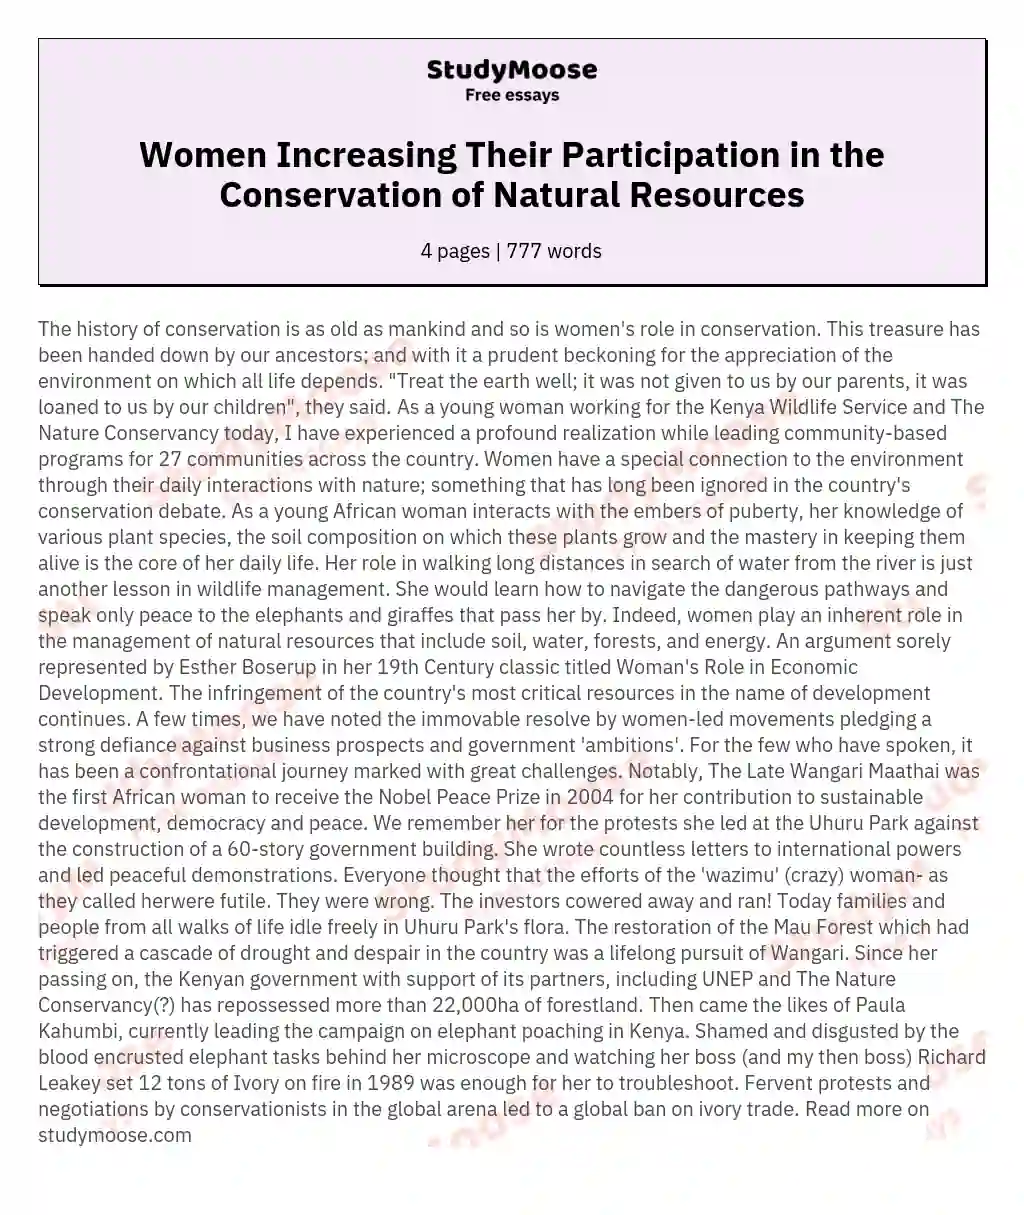 Women Increasing Their Participation in the Conservation of Natural Resources essay